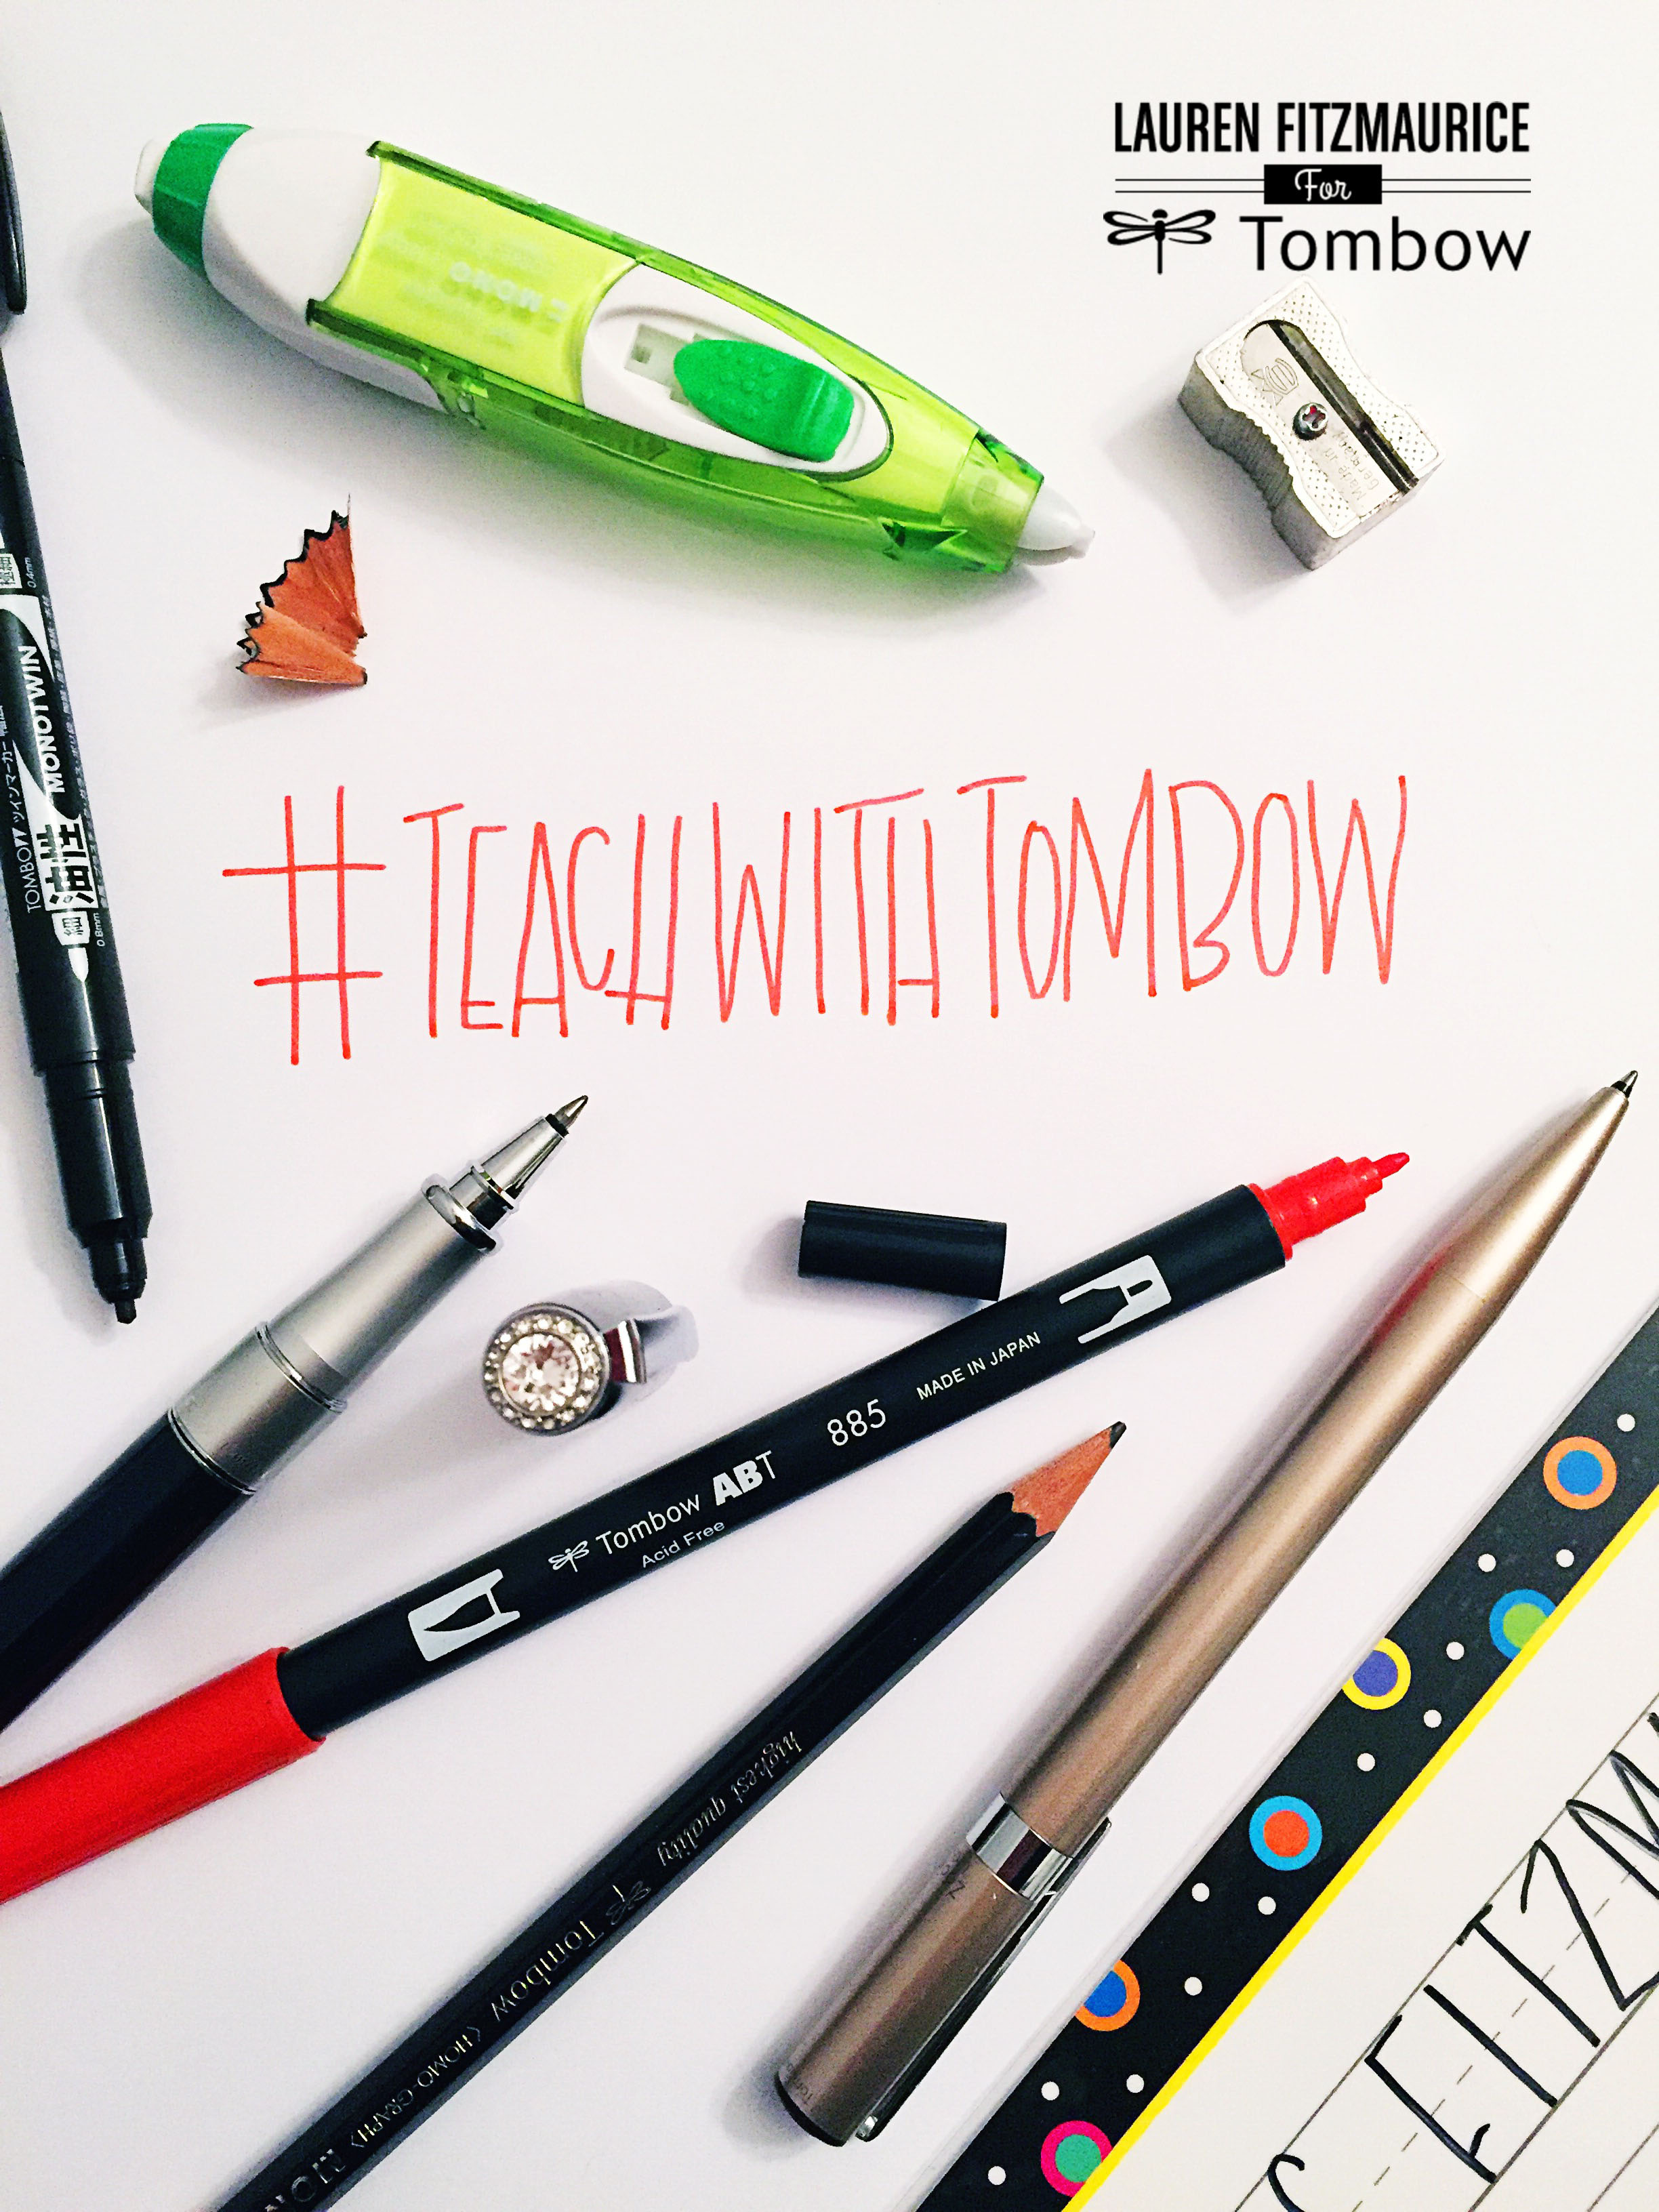 TeachWithTombow: Top Tombow Products for Teachers - Tombow USA Blog